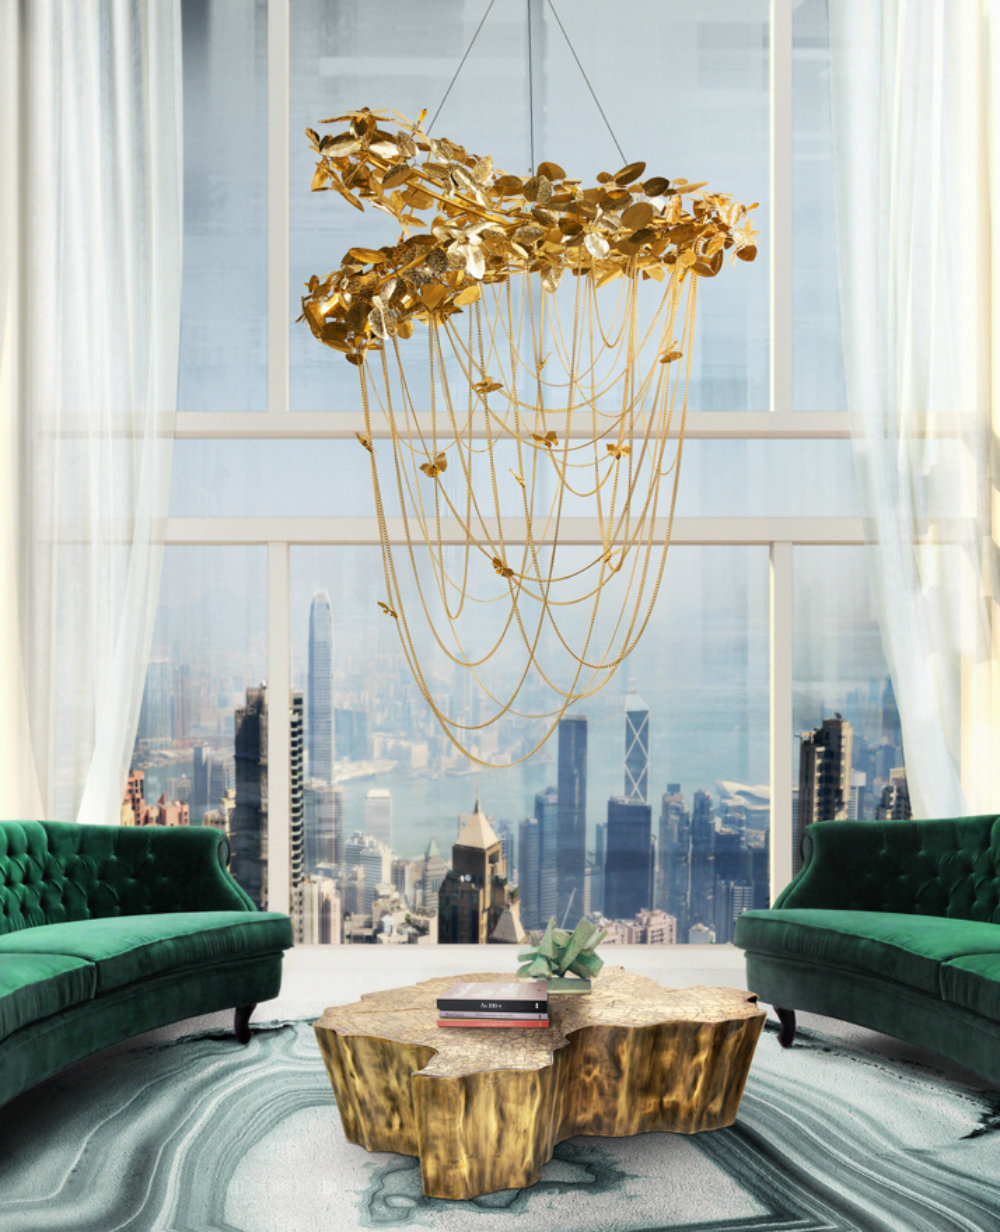 Amazing Chandeliers For Your Luxurious Living Room